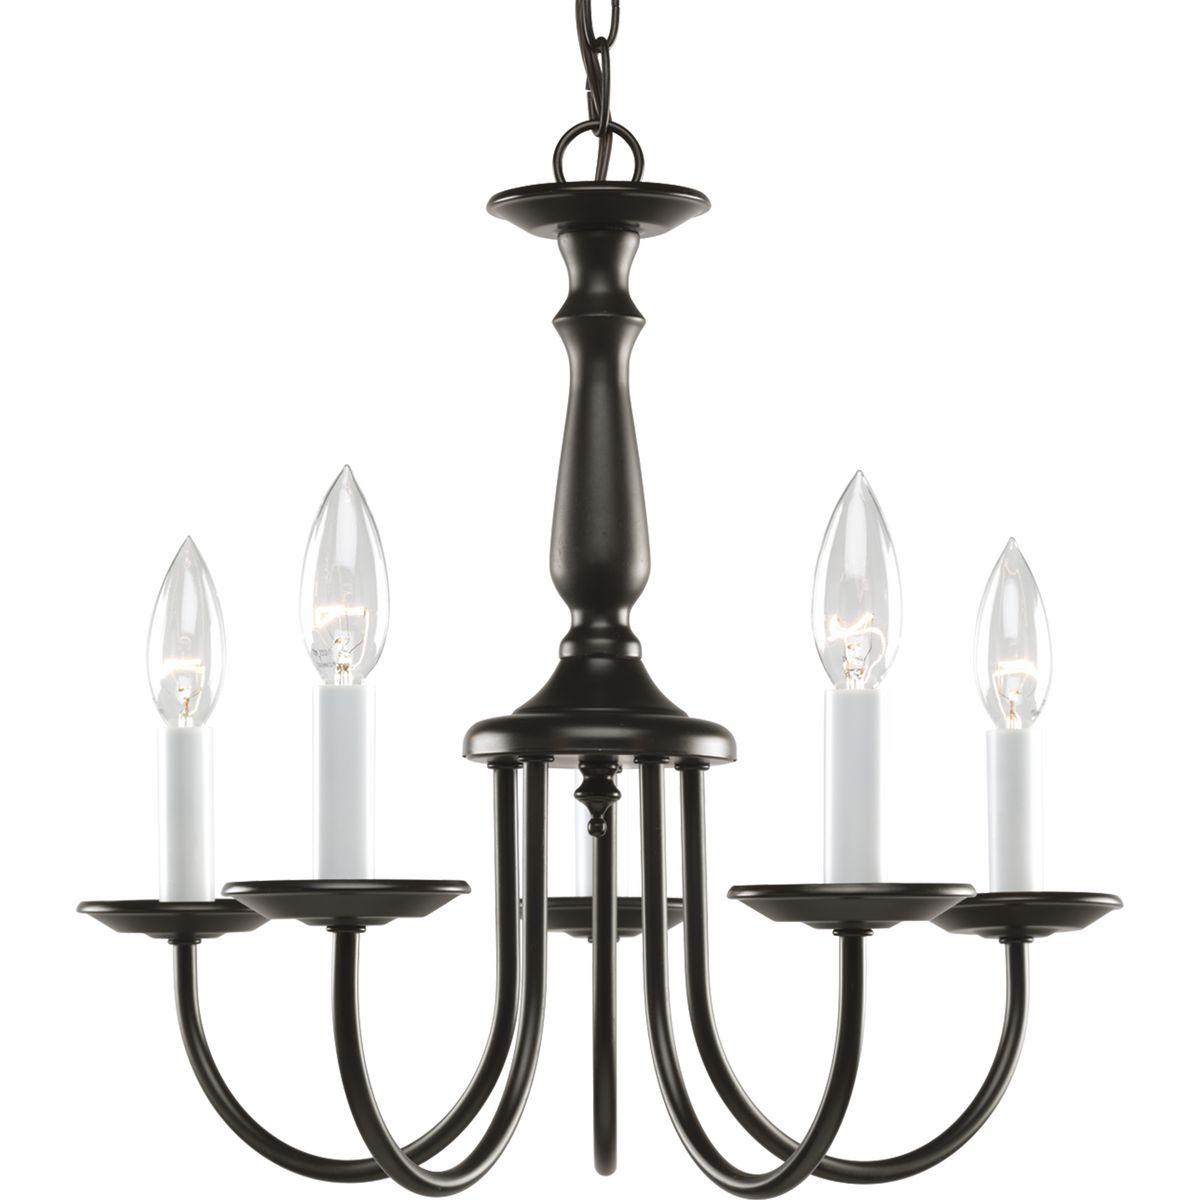 Hubbell HS41000-125 This five-light chandelier embodies traditional design in a Bronze finish. Featuring sleek arms and white candle covers, this chandelier adds an understated elegance to any home.  ; Bronze finish ; Simple, sleek arms ; White candle covers ; Traditional, e